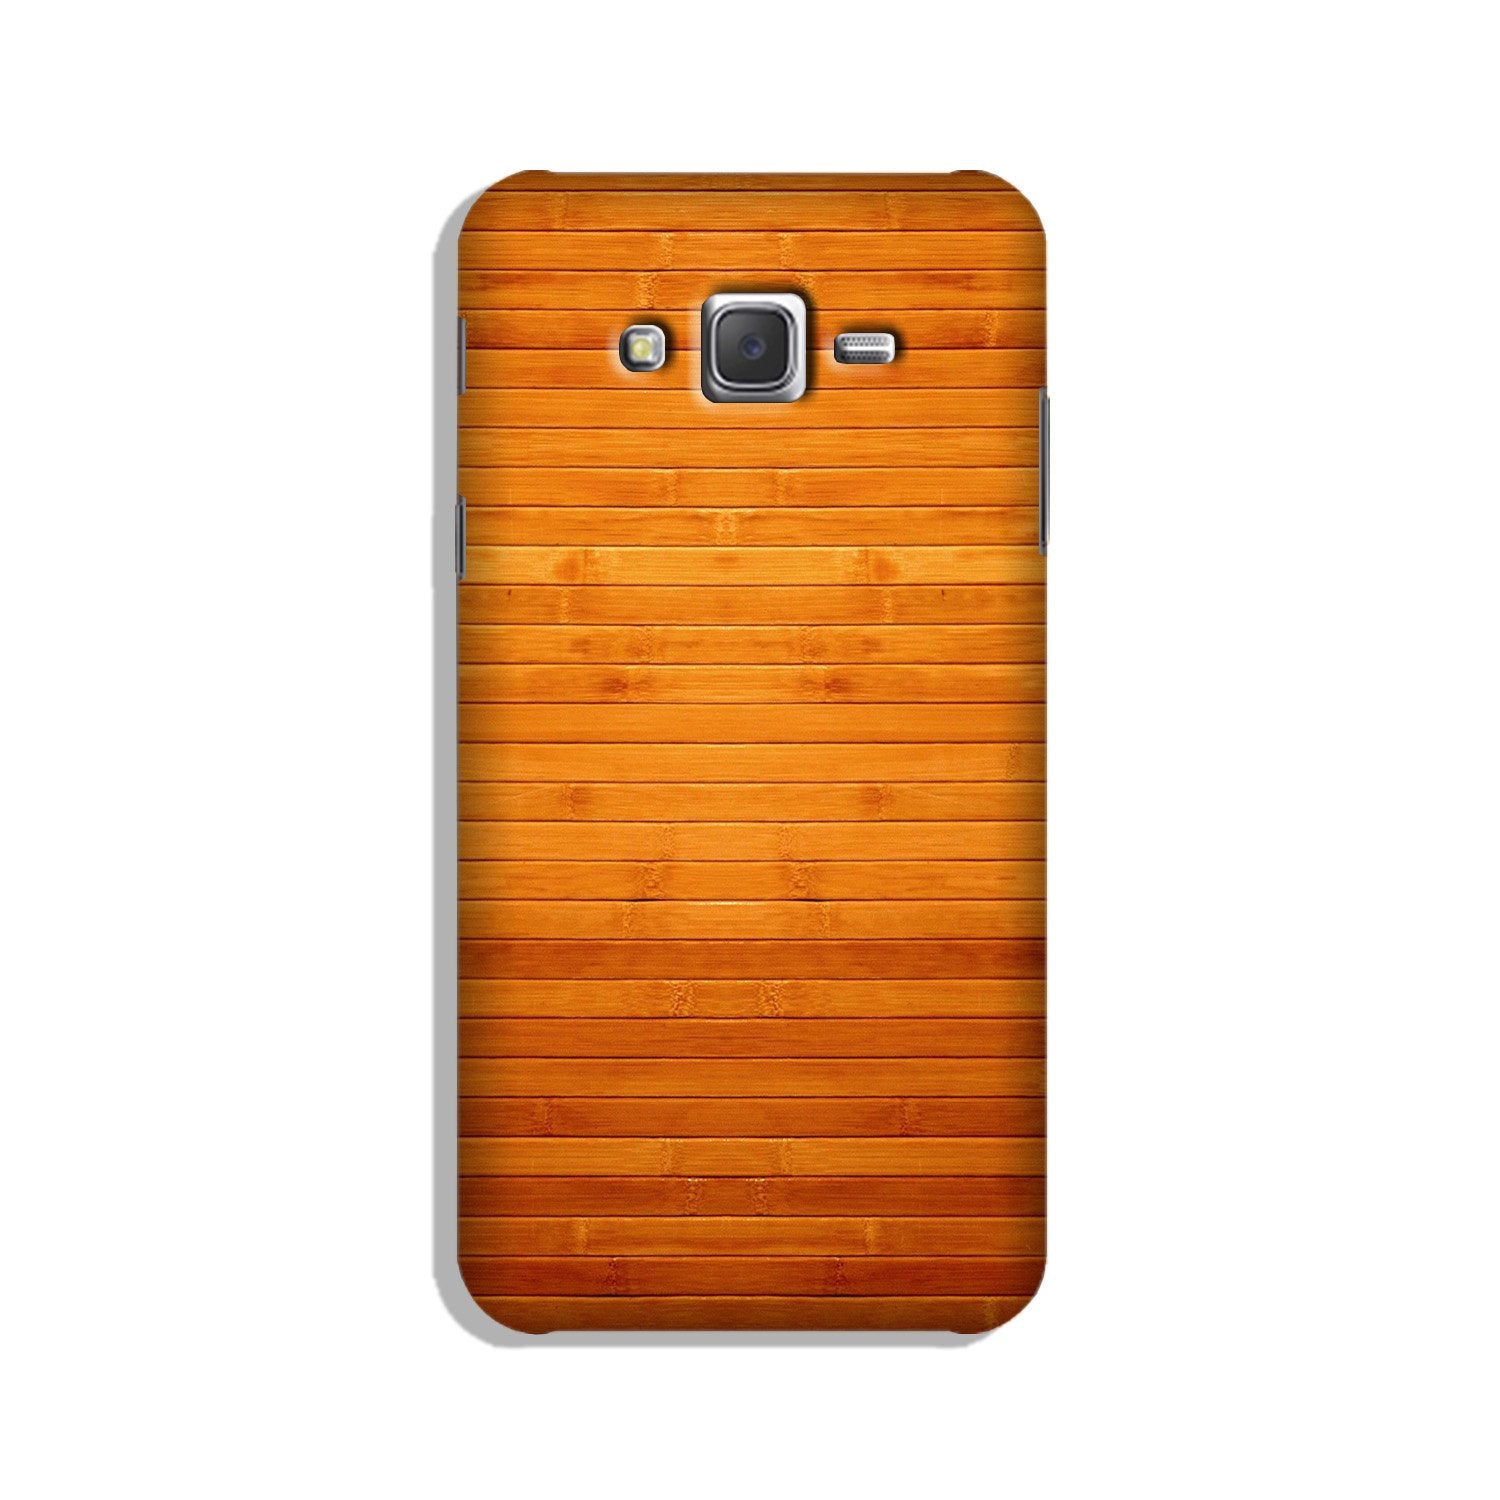 Wooden Look Case for Galaxy J7 Nxt  (Design - 111)